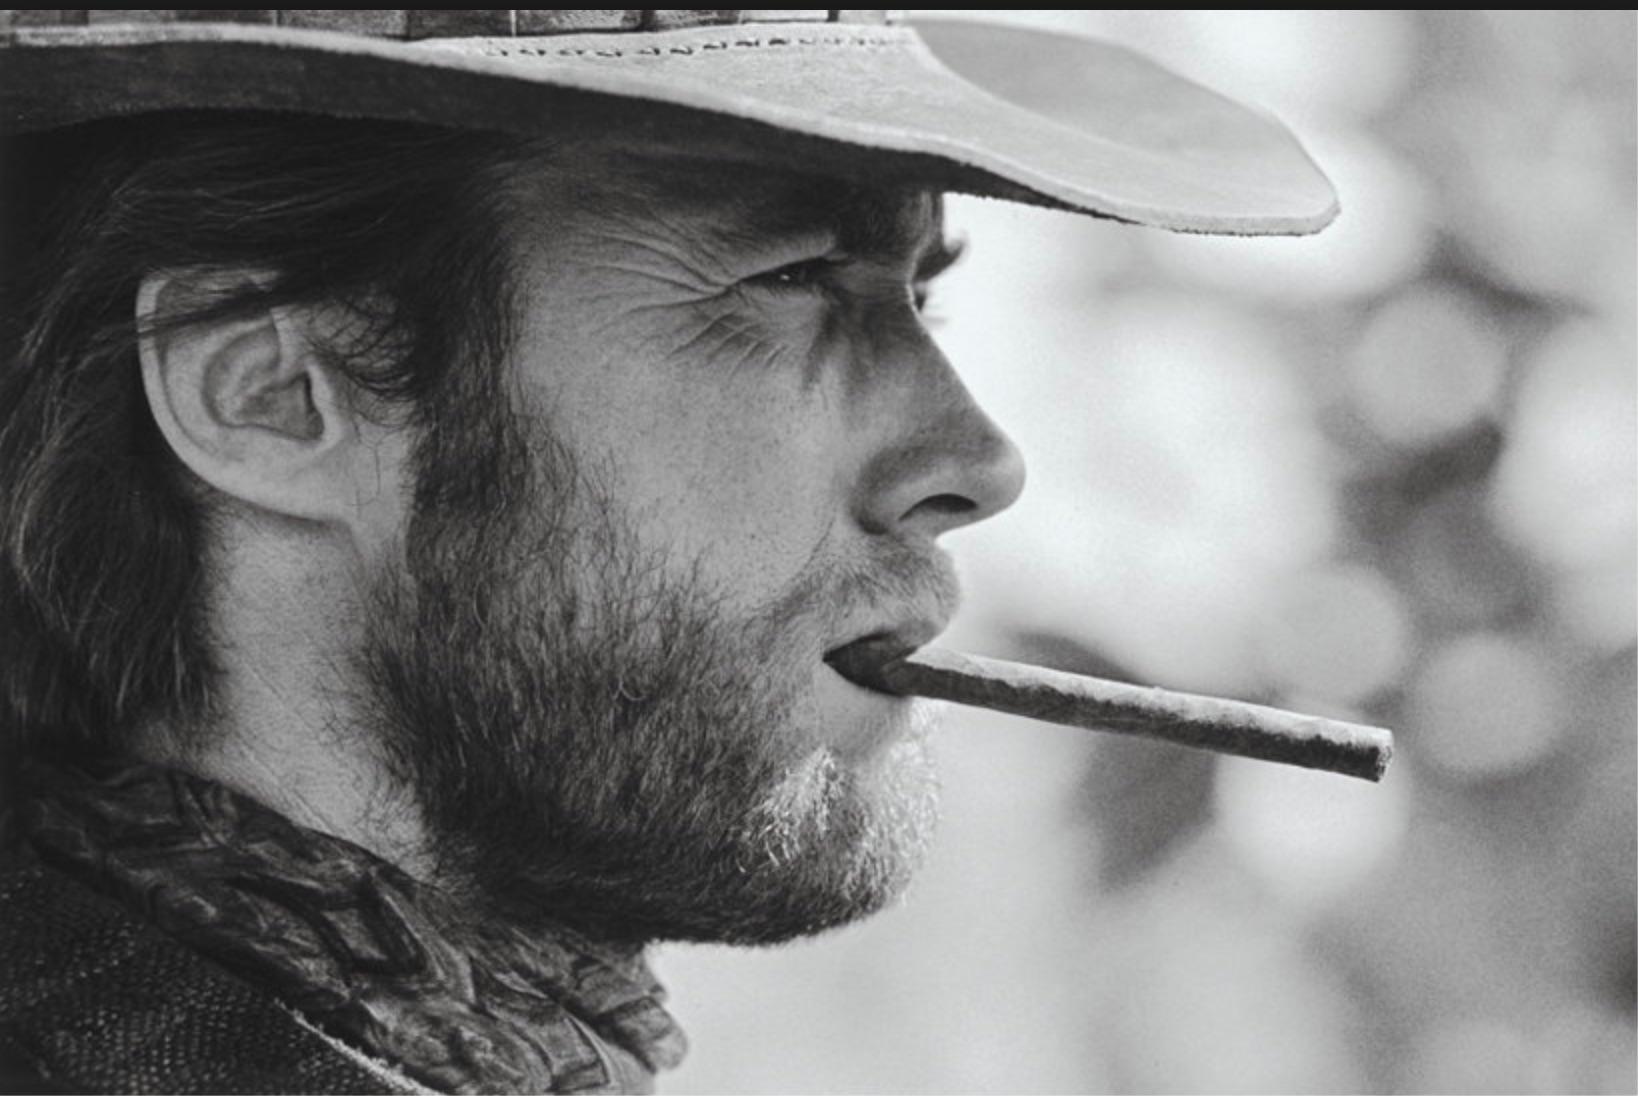 Lawrence Schiller Black and White Photograph - Clint Eastwood with Cigar, Durango, Mexico 